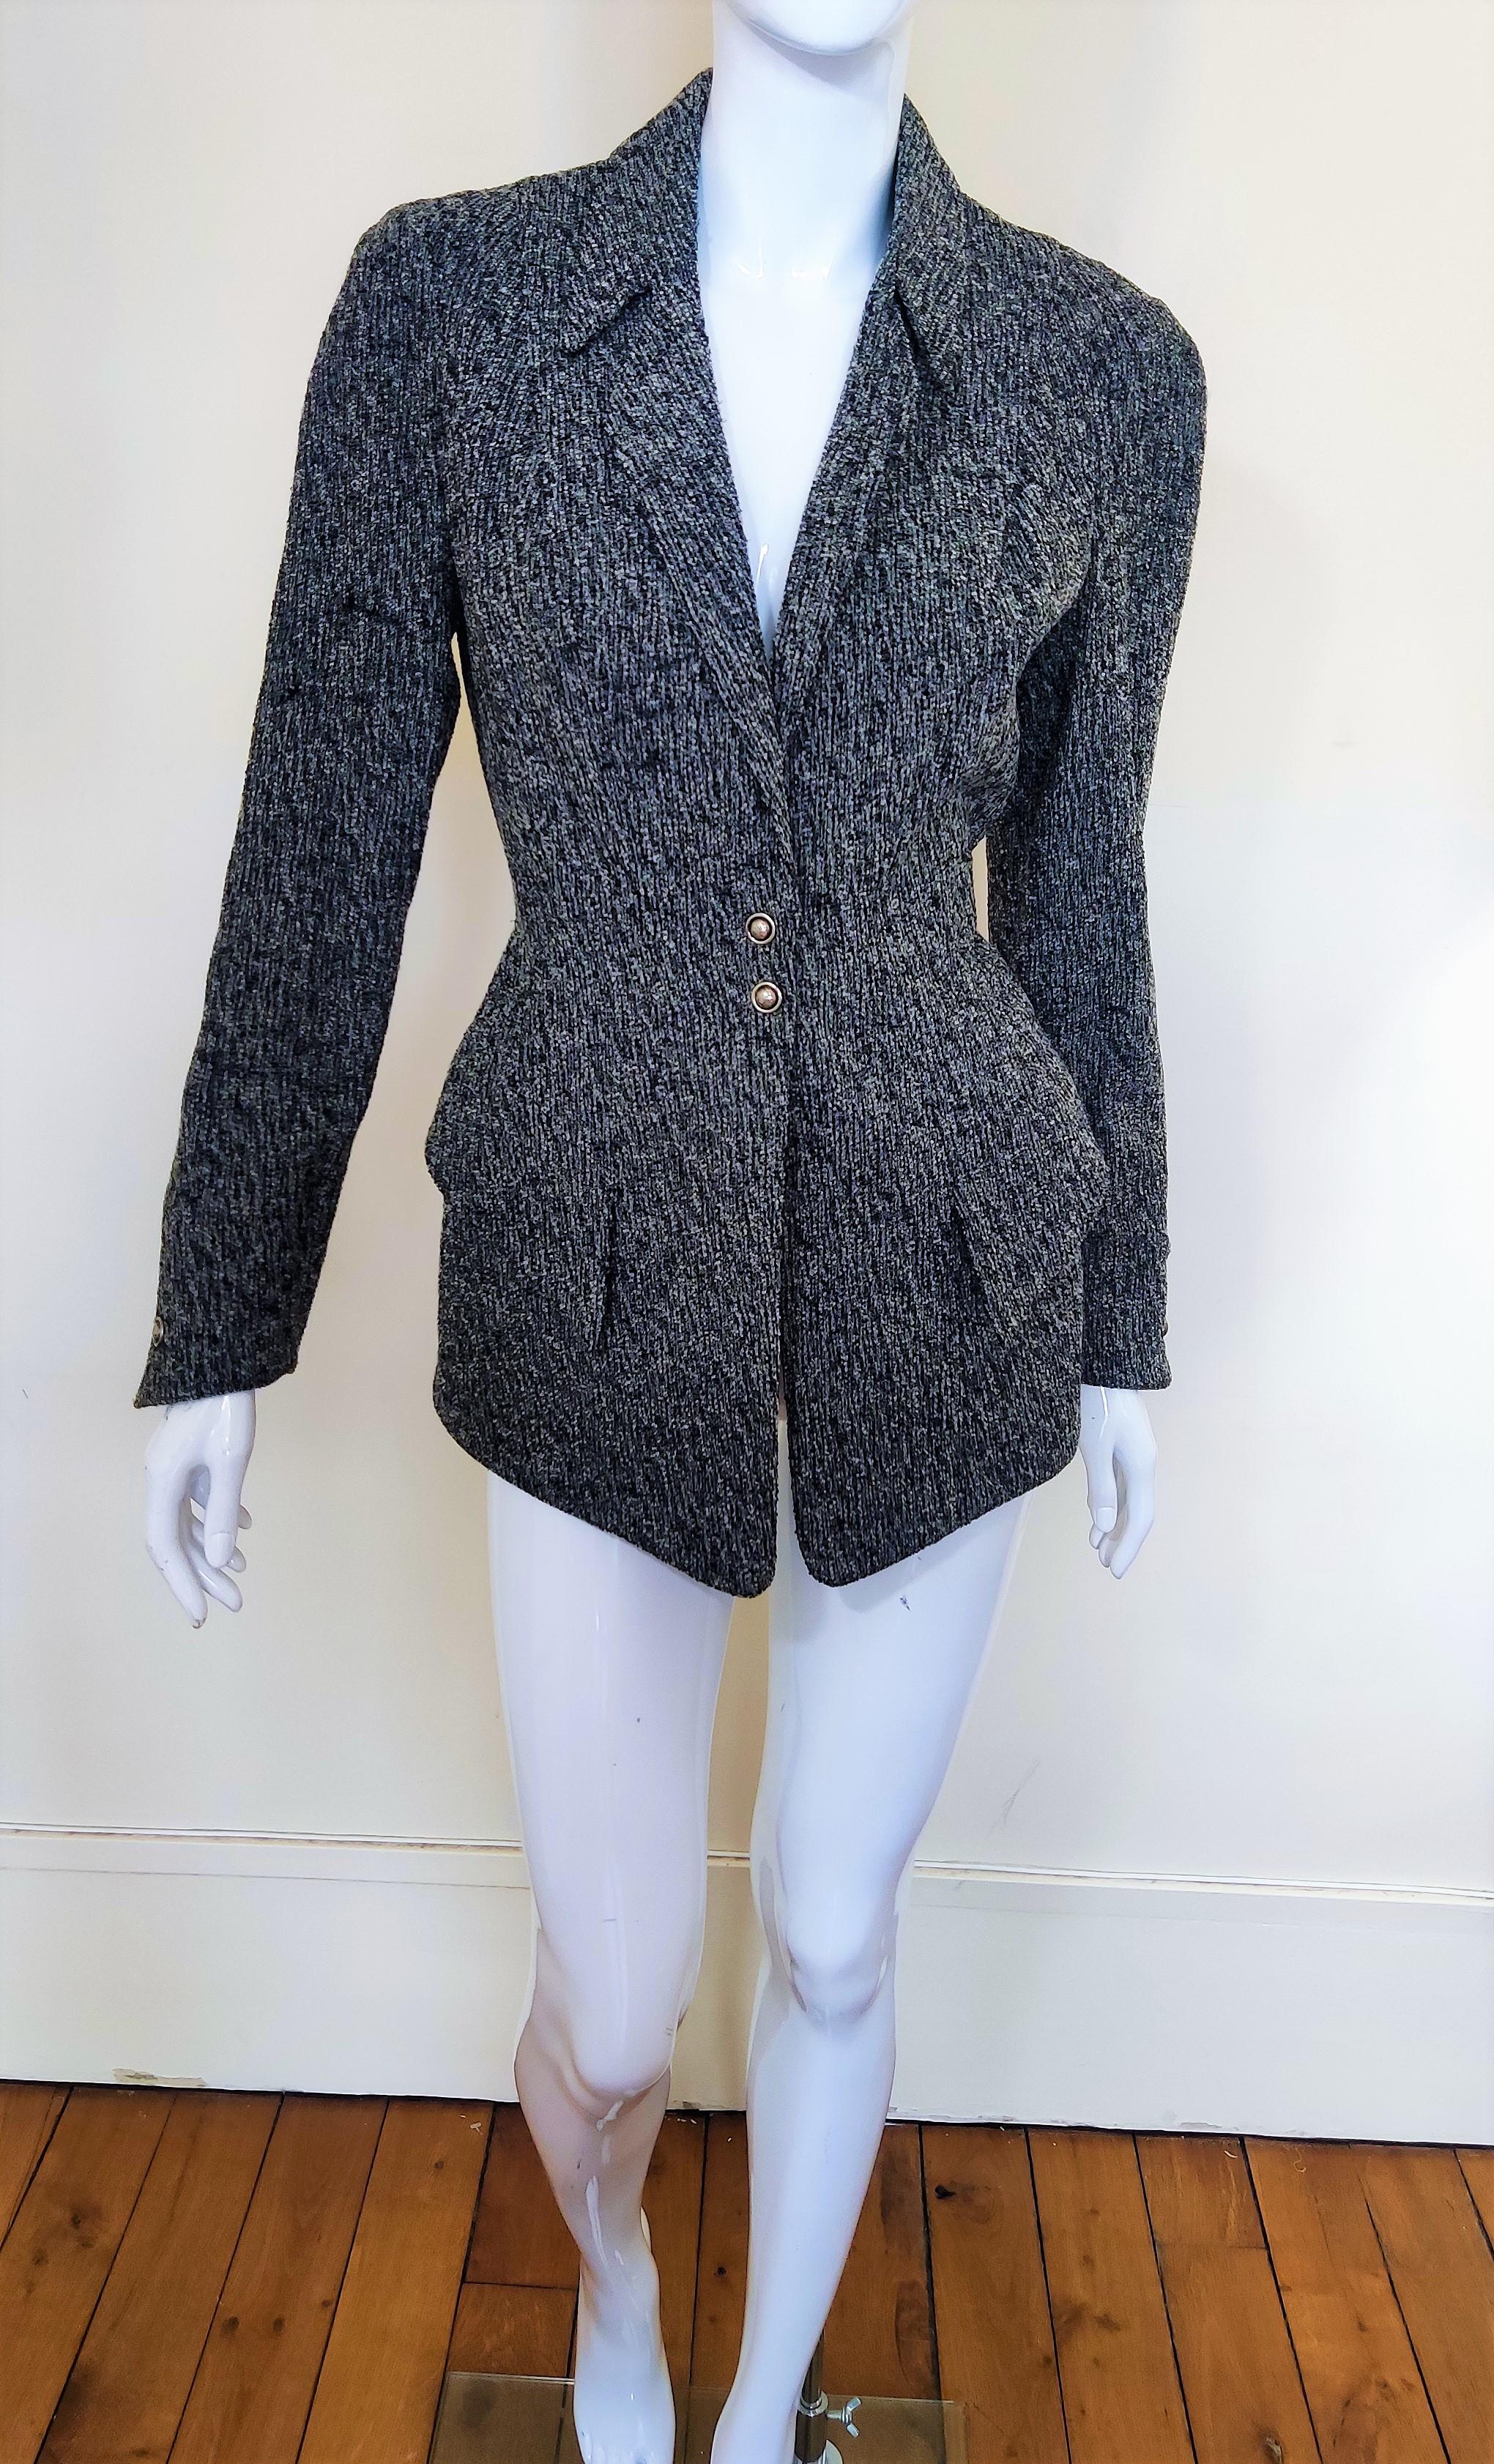 Wasp Waist jacket by Thierry Mugler!
With shoulder pads. 
Wonderful silhouette! 
Metal buttons!

VERY GOOD condition.

SIZE
Medium.
Marked size: FR38.
Please, read the measurements. 
Length: 72 cm / 28.3 inch
Bust: 42 cm / 16.5 inch
Waist: 35 cm /